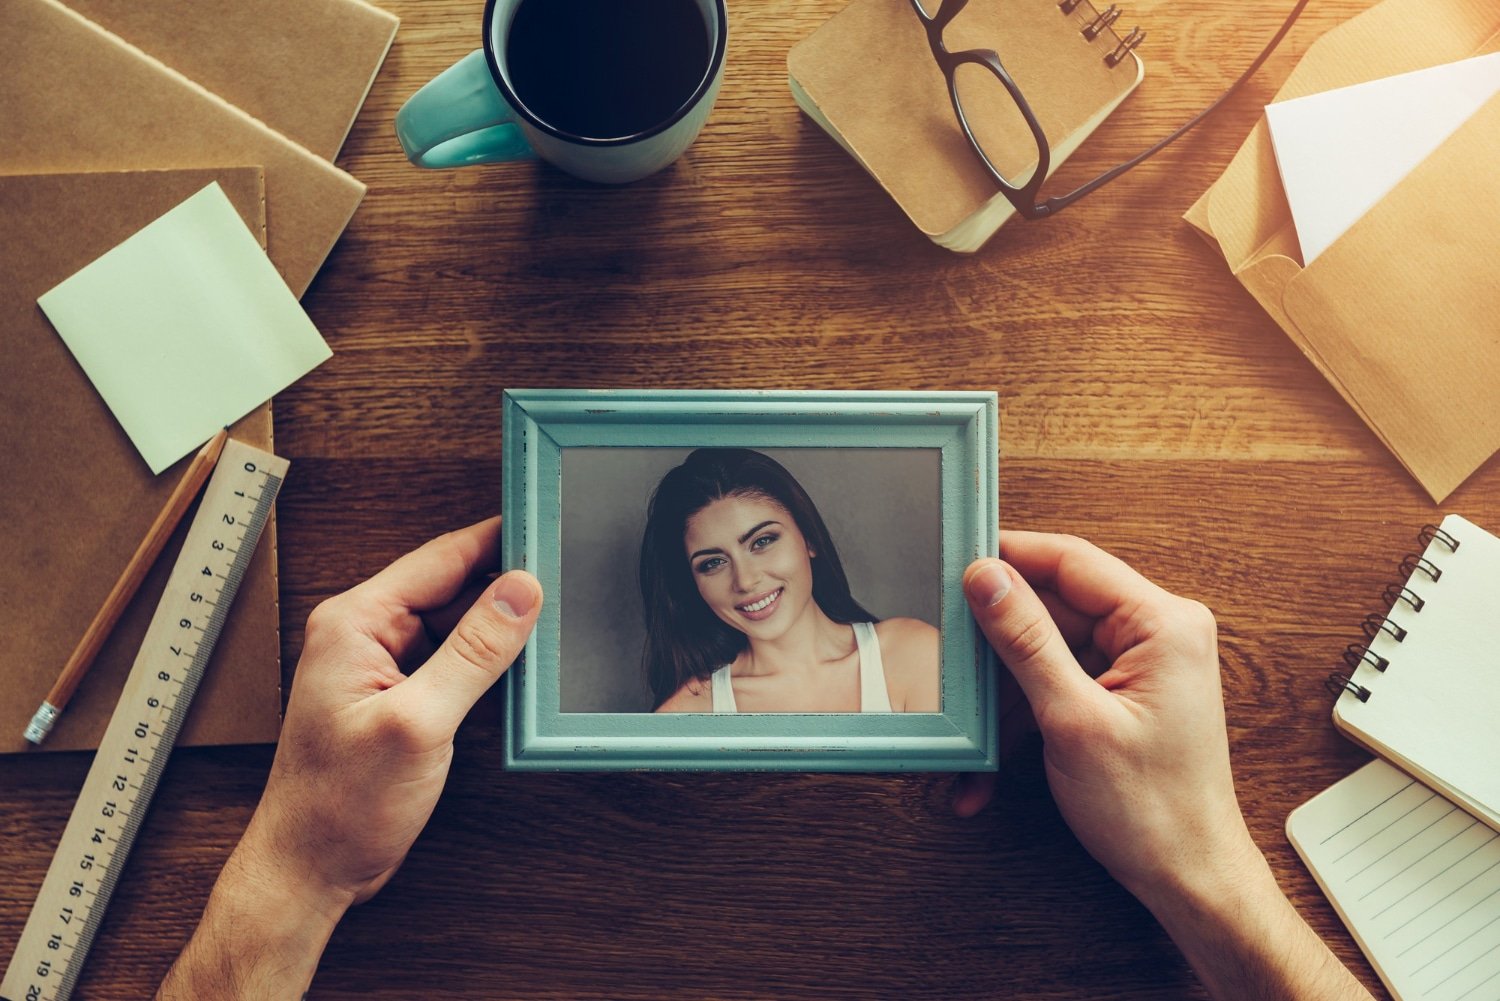 You are currently viewing Aura Frames: Bringing Your Digital Memories to Life